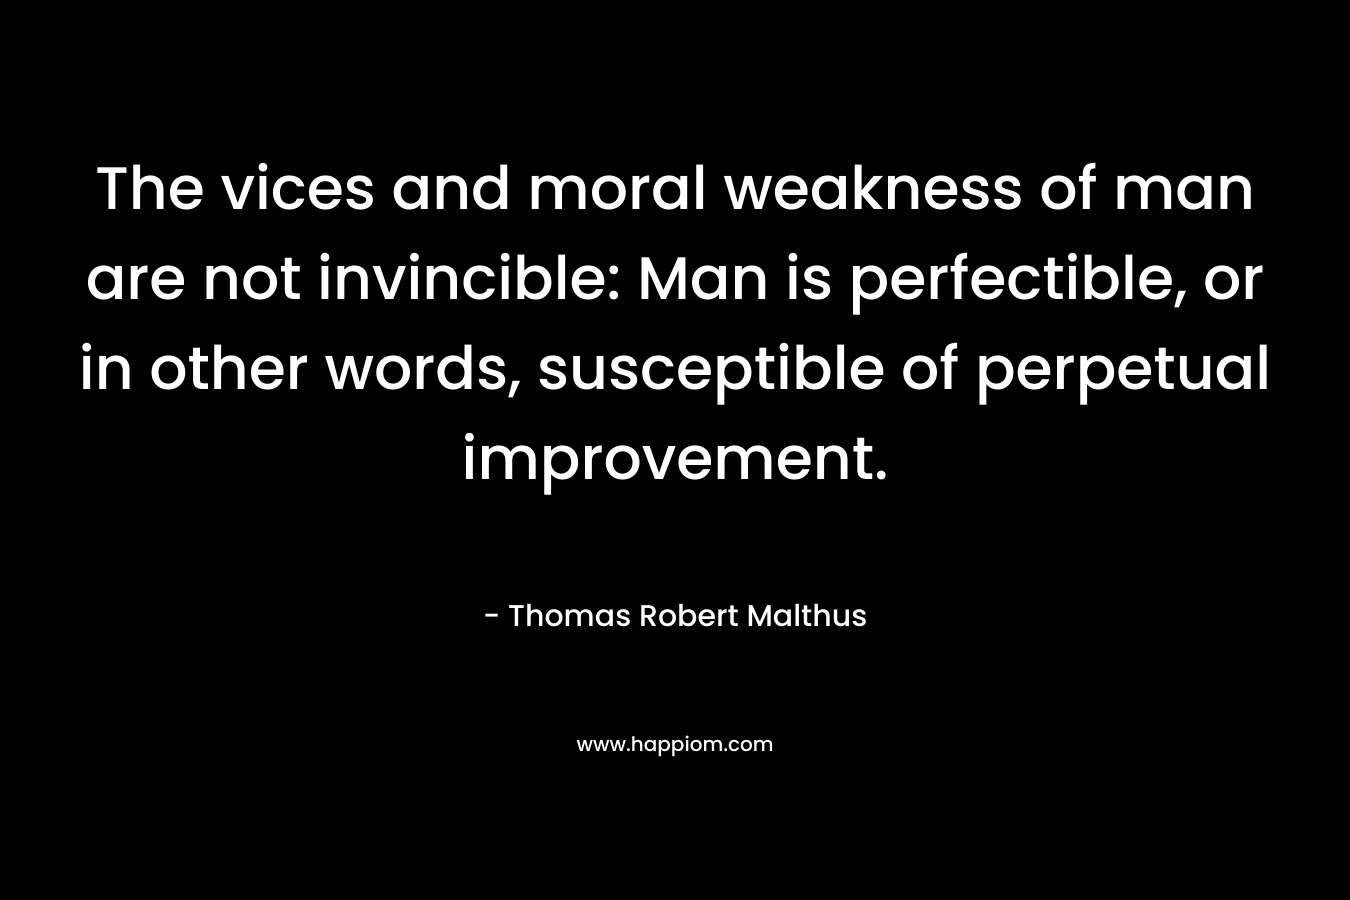 The vices and moral weakness of man are not invincible: Man is perfectible, or in other words, susceptible of perpetual improvement. – Thomas Robert Malthus